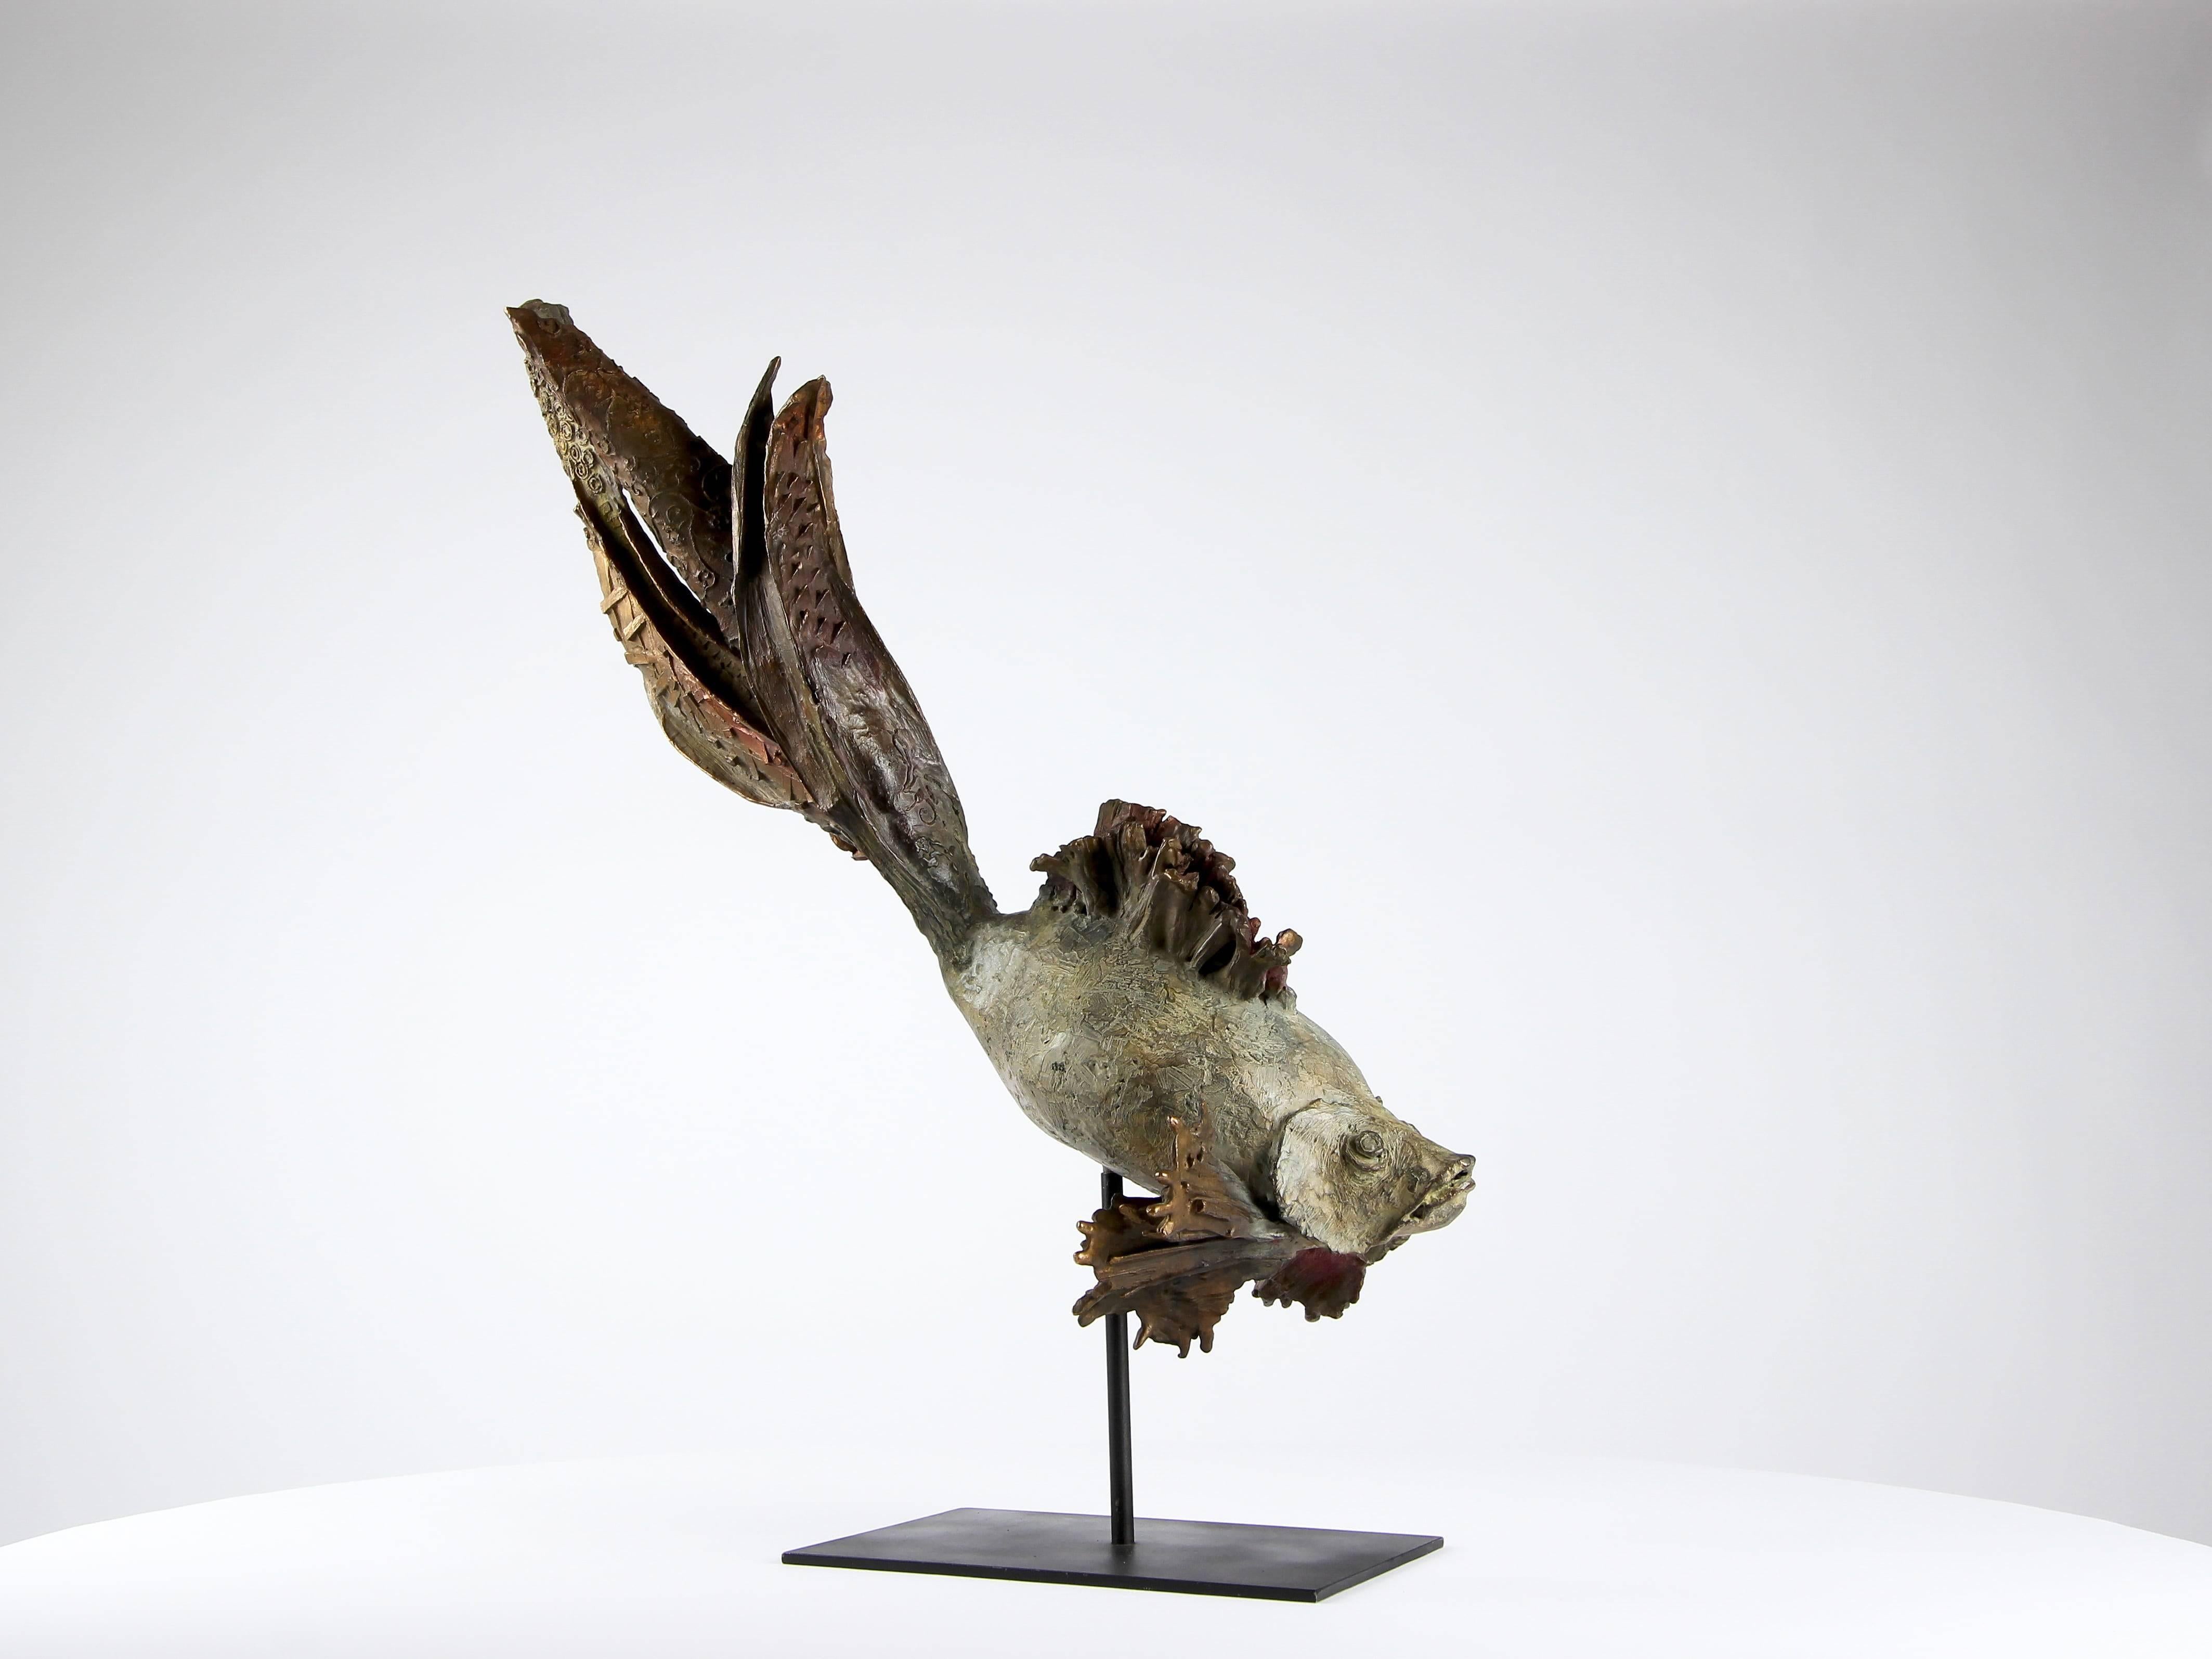 Siamese Fighting Fish 'Princess' is a one-off sculpture by contemporary artist Chésade, representative of the sculptor's interest in the marine world. Bronze, 44 cm × 60 cm × 25 cm.

Chésade regards the sea as "a conservatory of exoticism for the